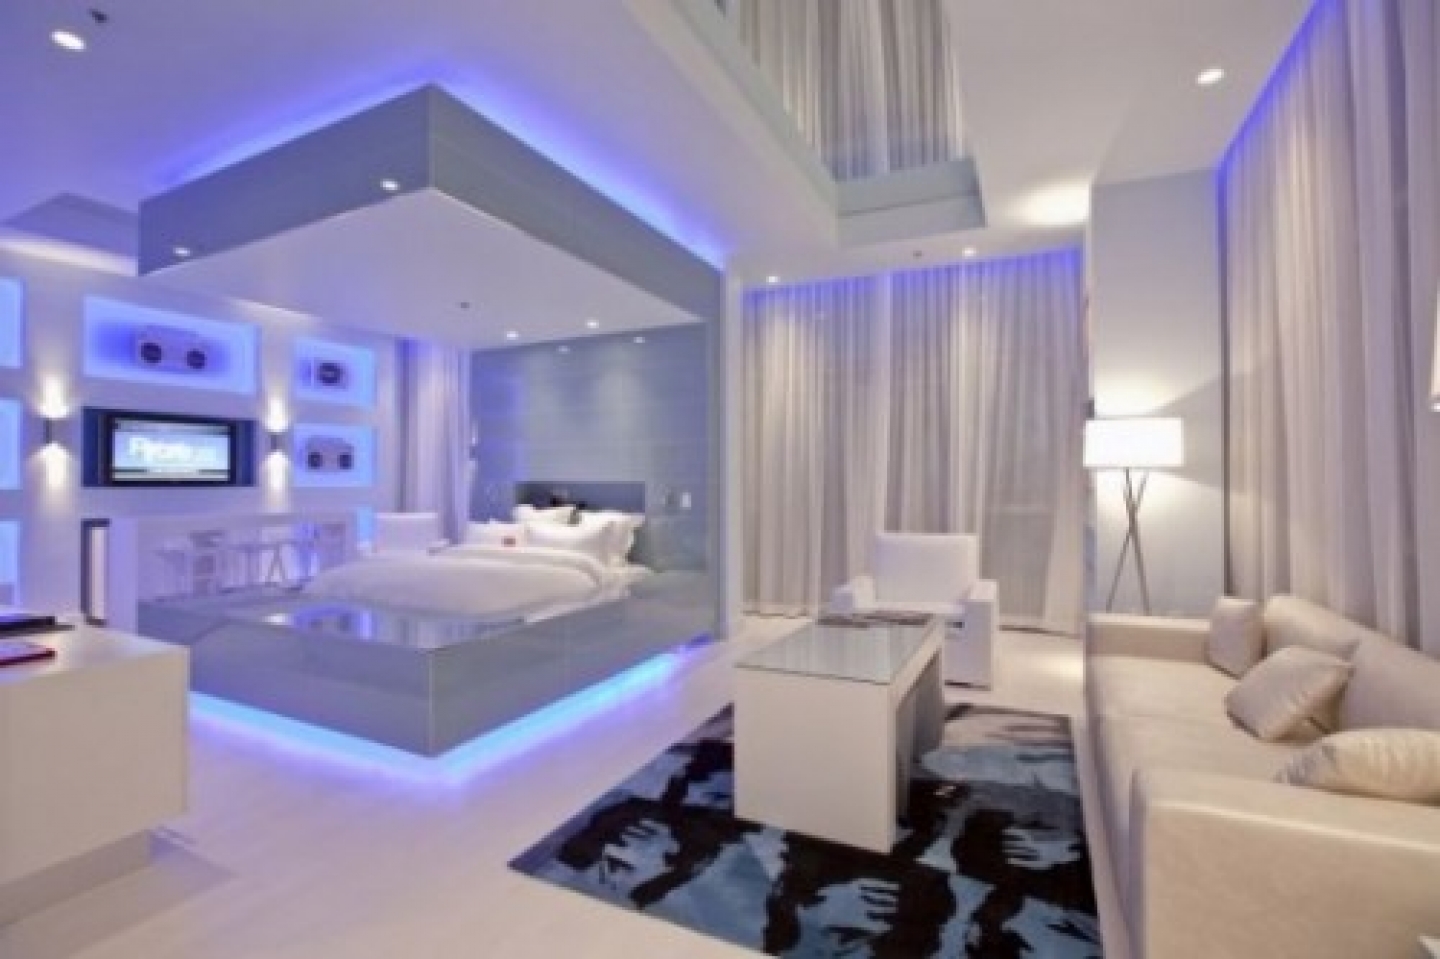 25 Best Bedroom Designs Ideas The WoW Style